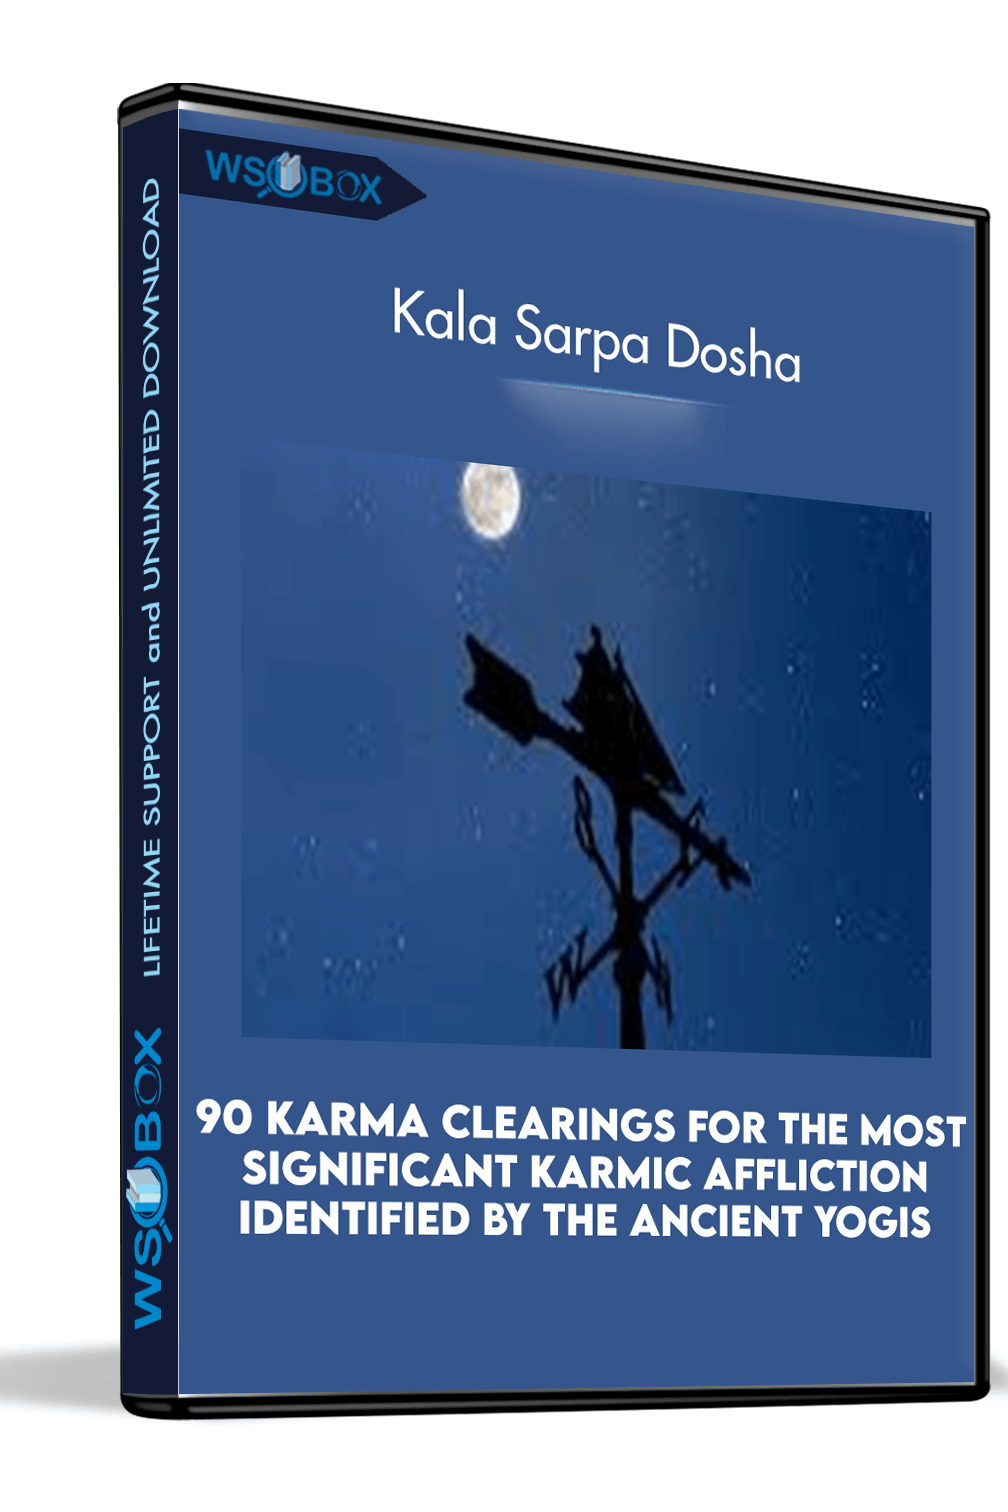 90 Karma Clearings for the Most Significant Karmic Affliction Identified By the Ancient Yogis -- "Kala Sarpa Dosha": the Karma of the Nodes, Worry, Fear about the Future, Destabilization